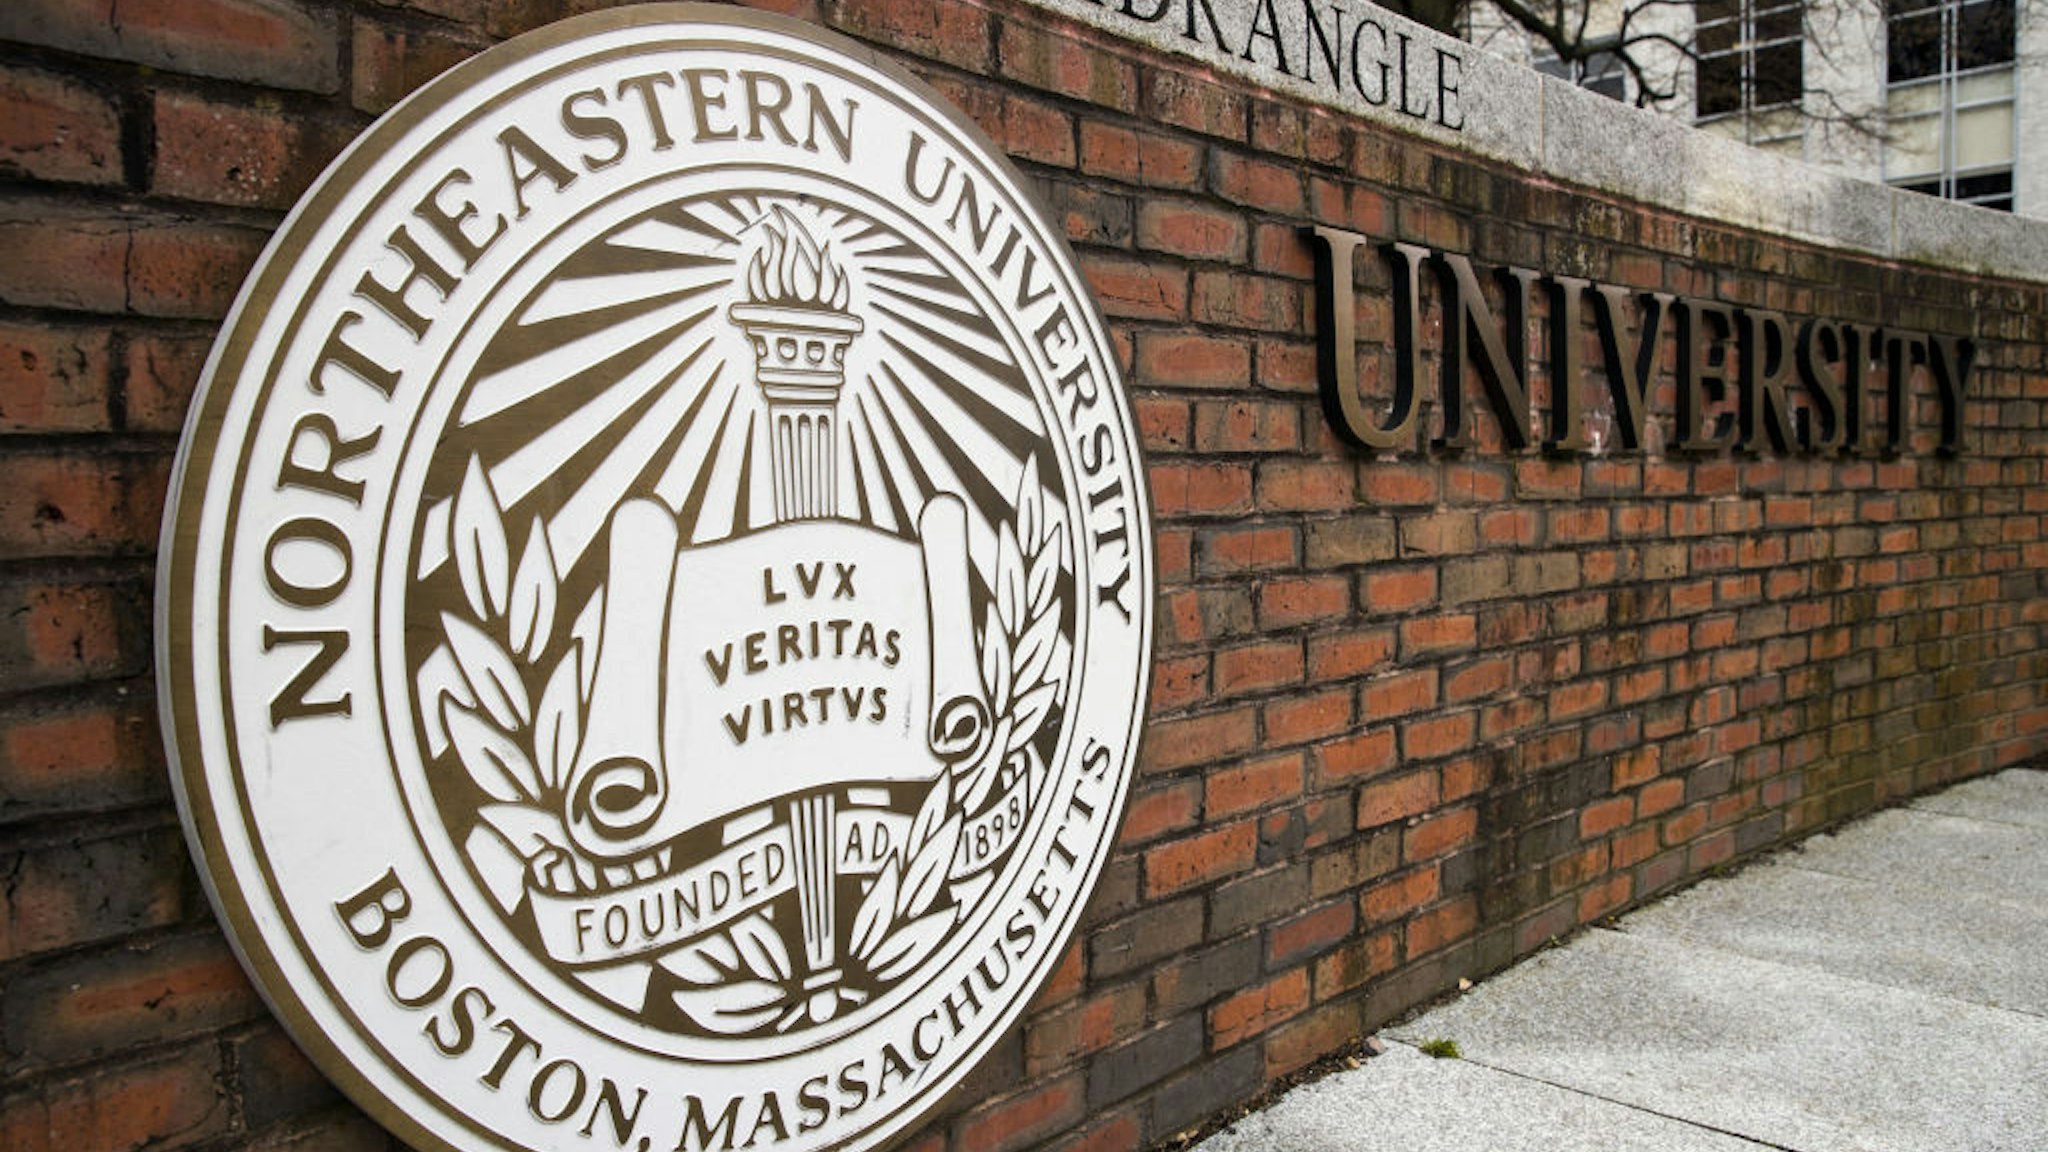 Signage is displayed at Northeastern University in Boston, Massachusetts, U.S., on Monday, April 20, 2020. College financial aid offices are bracing for a spike in appeals from students finding that the aid packages they were offered for next year are no longer enough after the coronavirus pandemic cost their parents jobs or income.